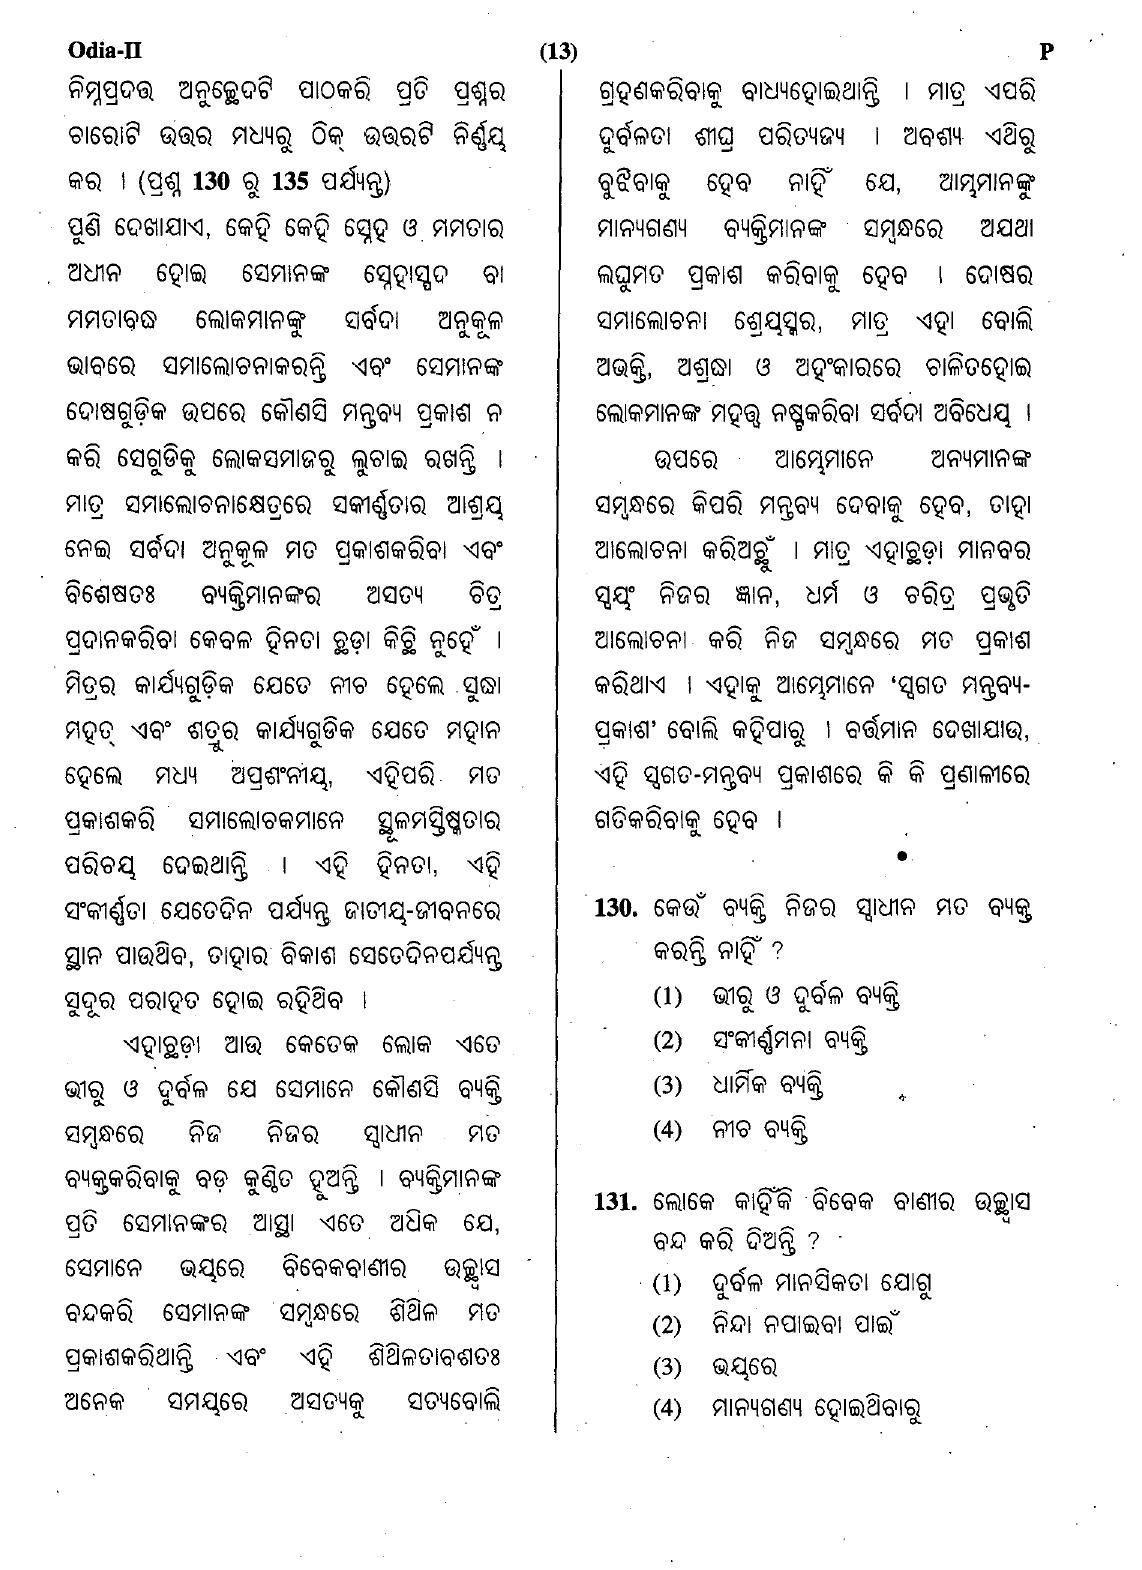 OSSSC Livestock Inspector Previous Question Paper - Odia - Page 13